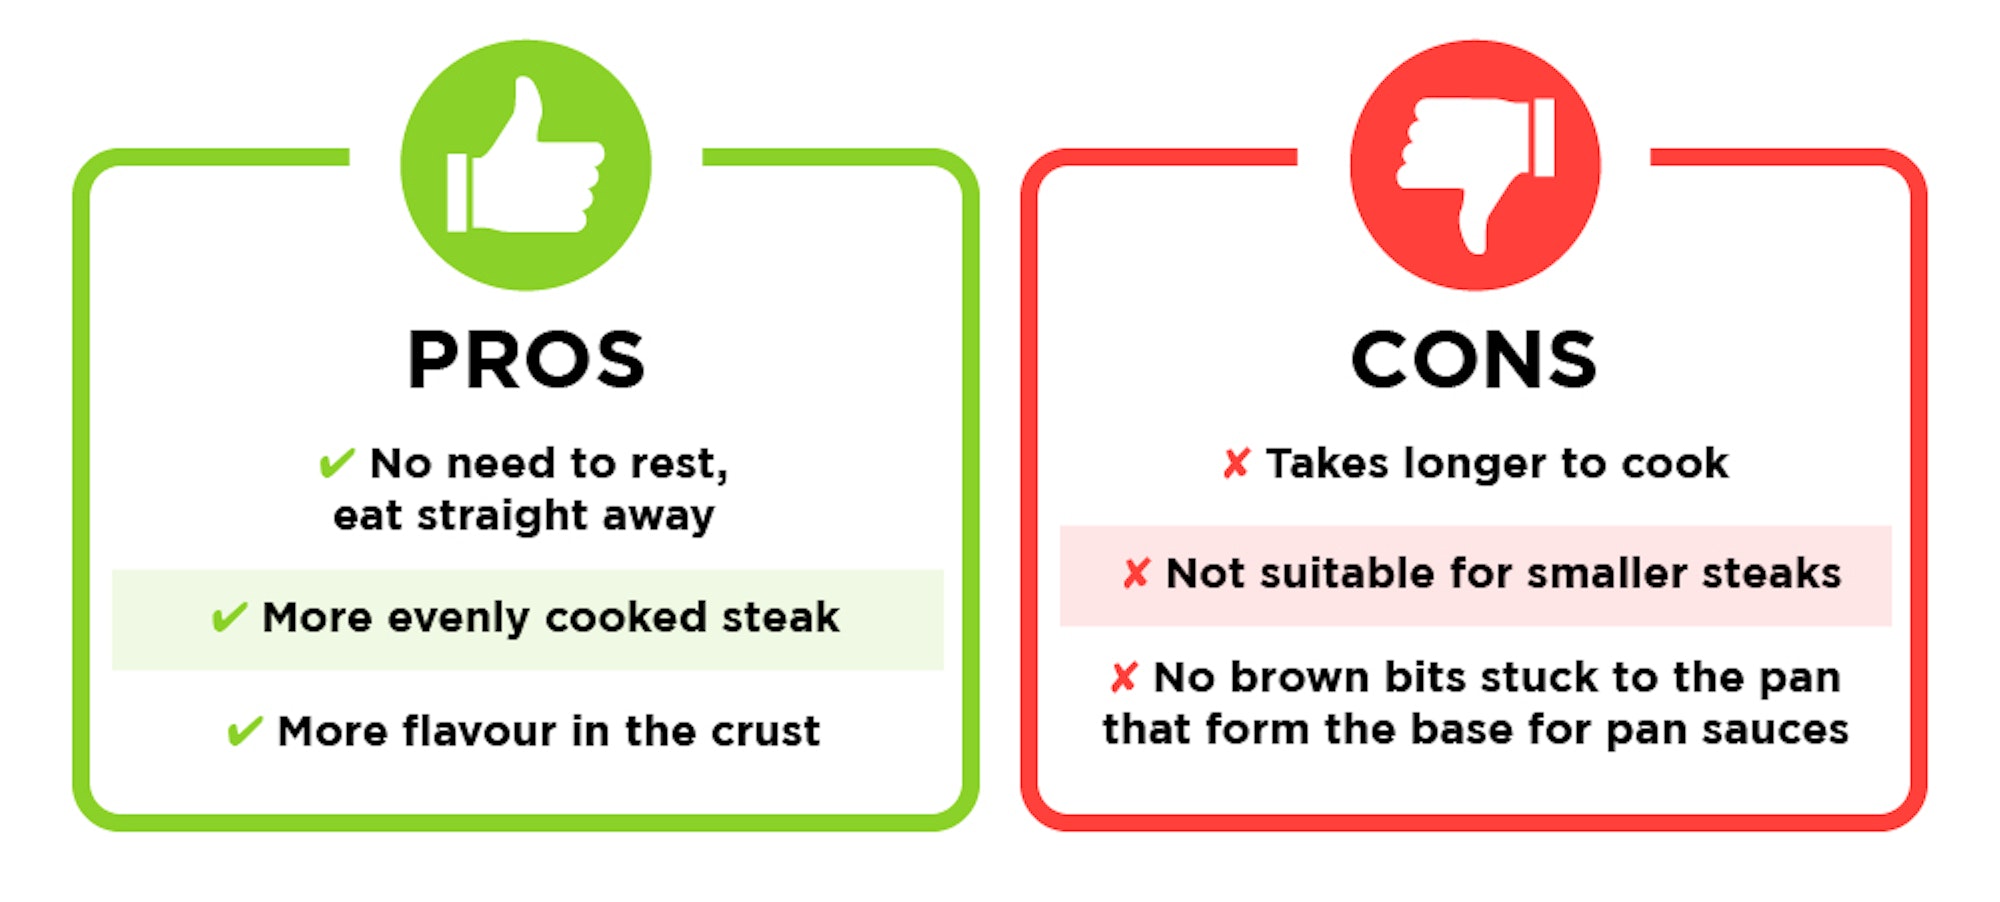 Pros and Cons of Reverse-searing a Steak infographic